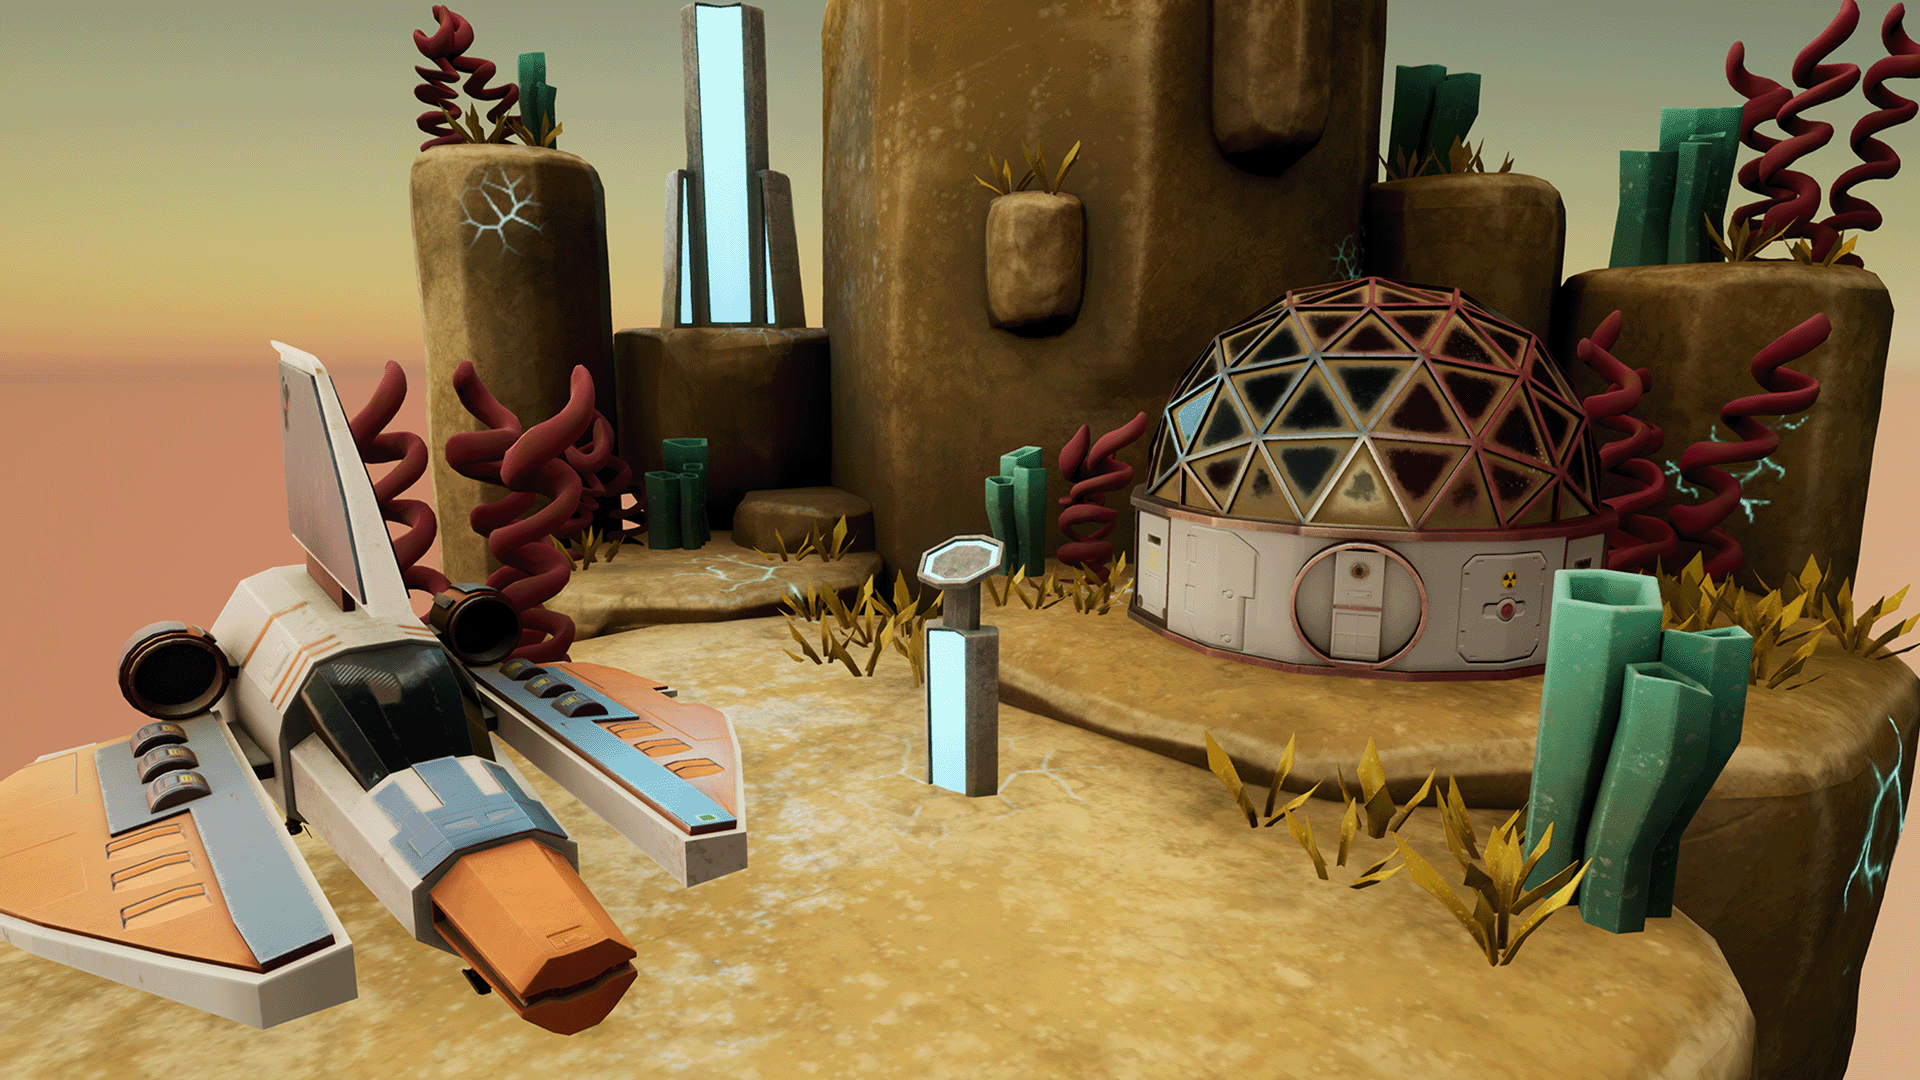 A 3D modelled space scene of colourful plants on a orange rocky world with a spaceship, base and blue glowing stone obelisks.